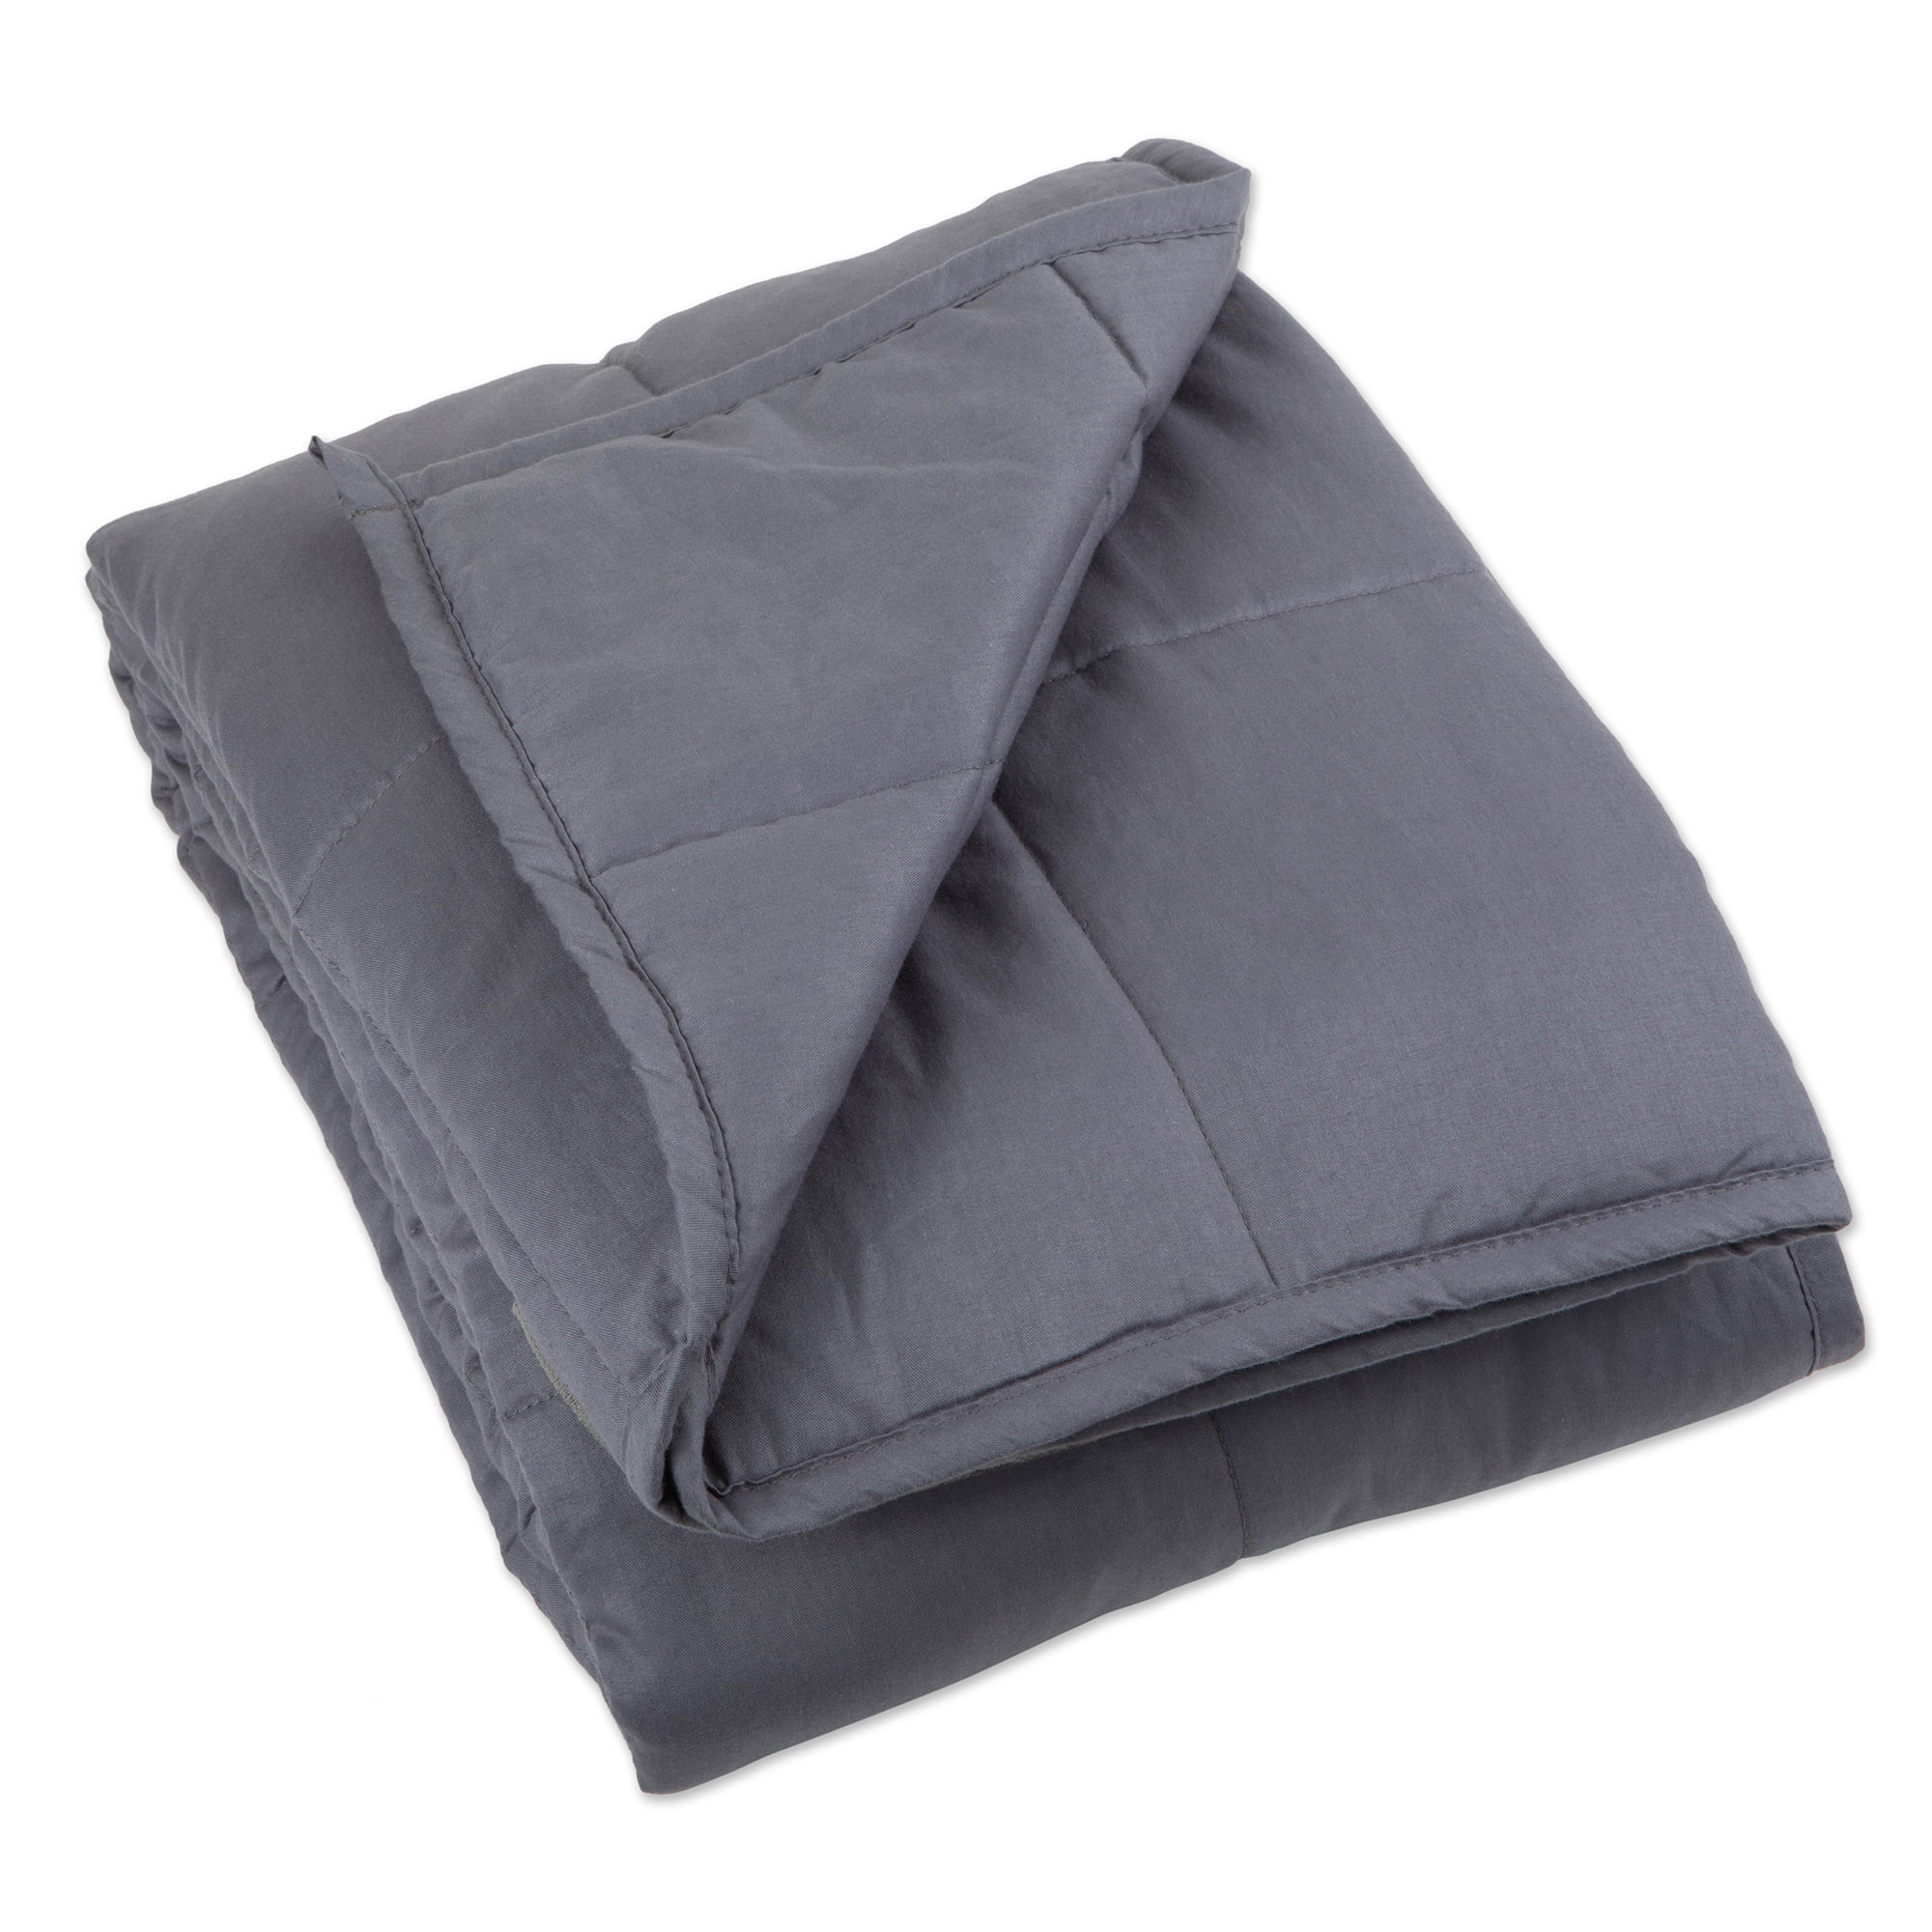 Z02291 20 Lbs Weighted Blanket, Grey - 60 X 80 In.